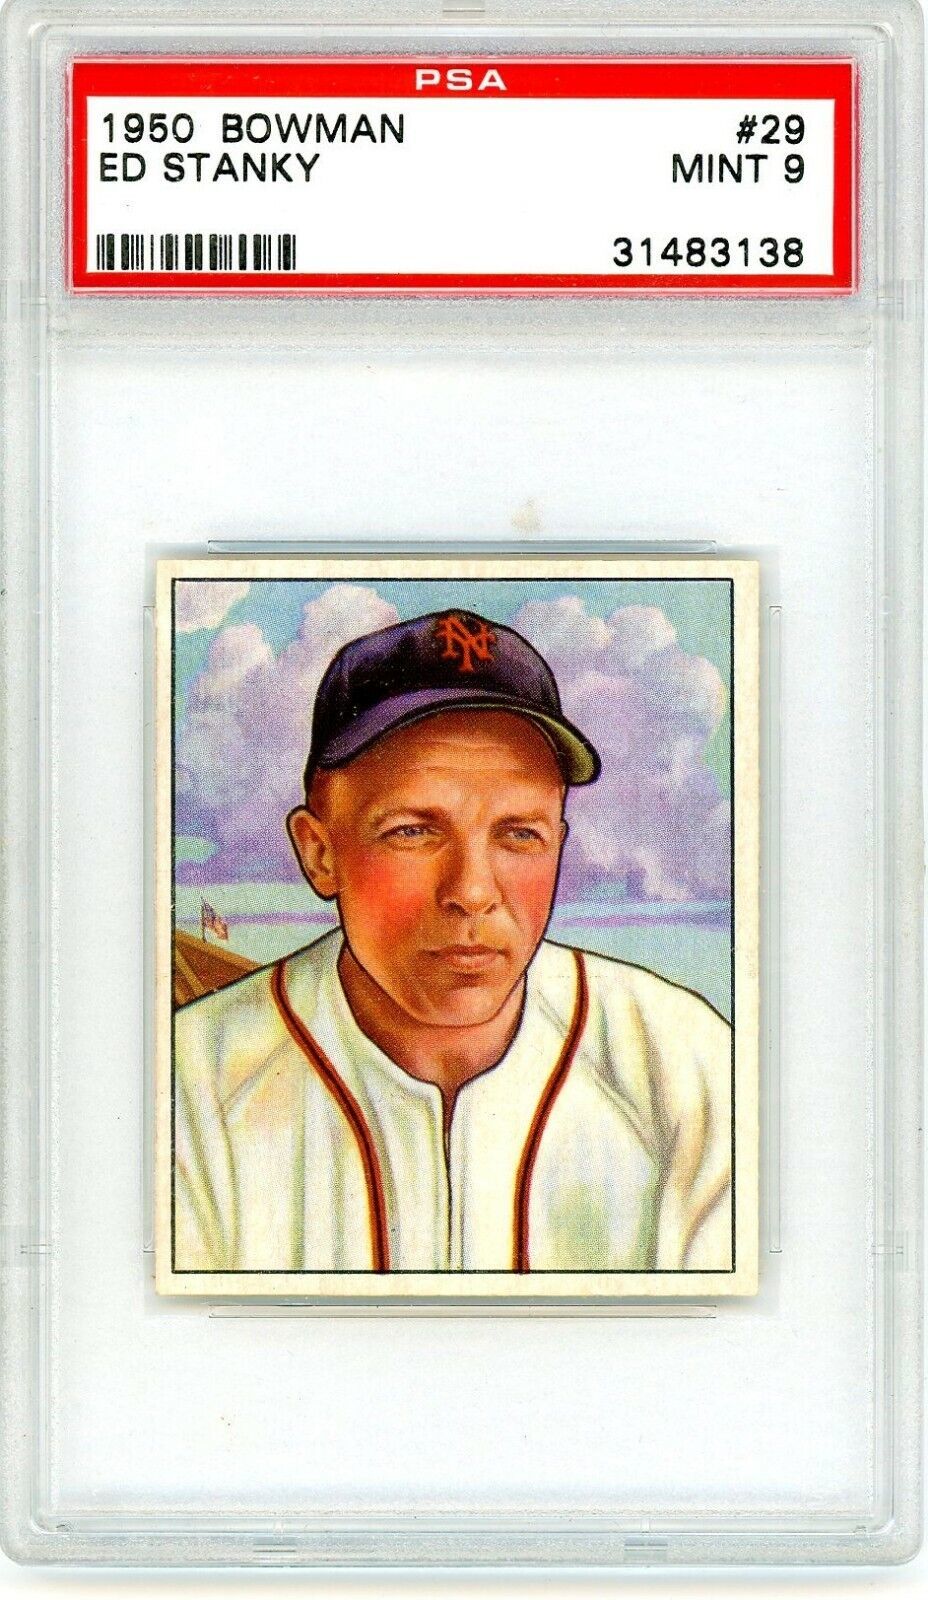 Primary image for 1950 Bowman Ed Stanky #29 PSA 9 P1260